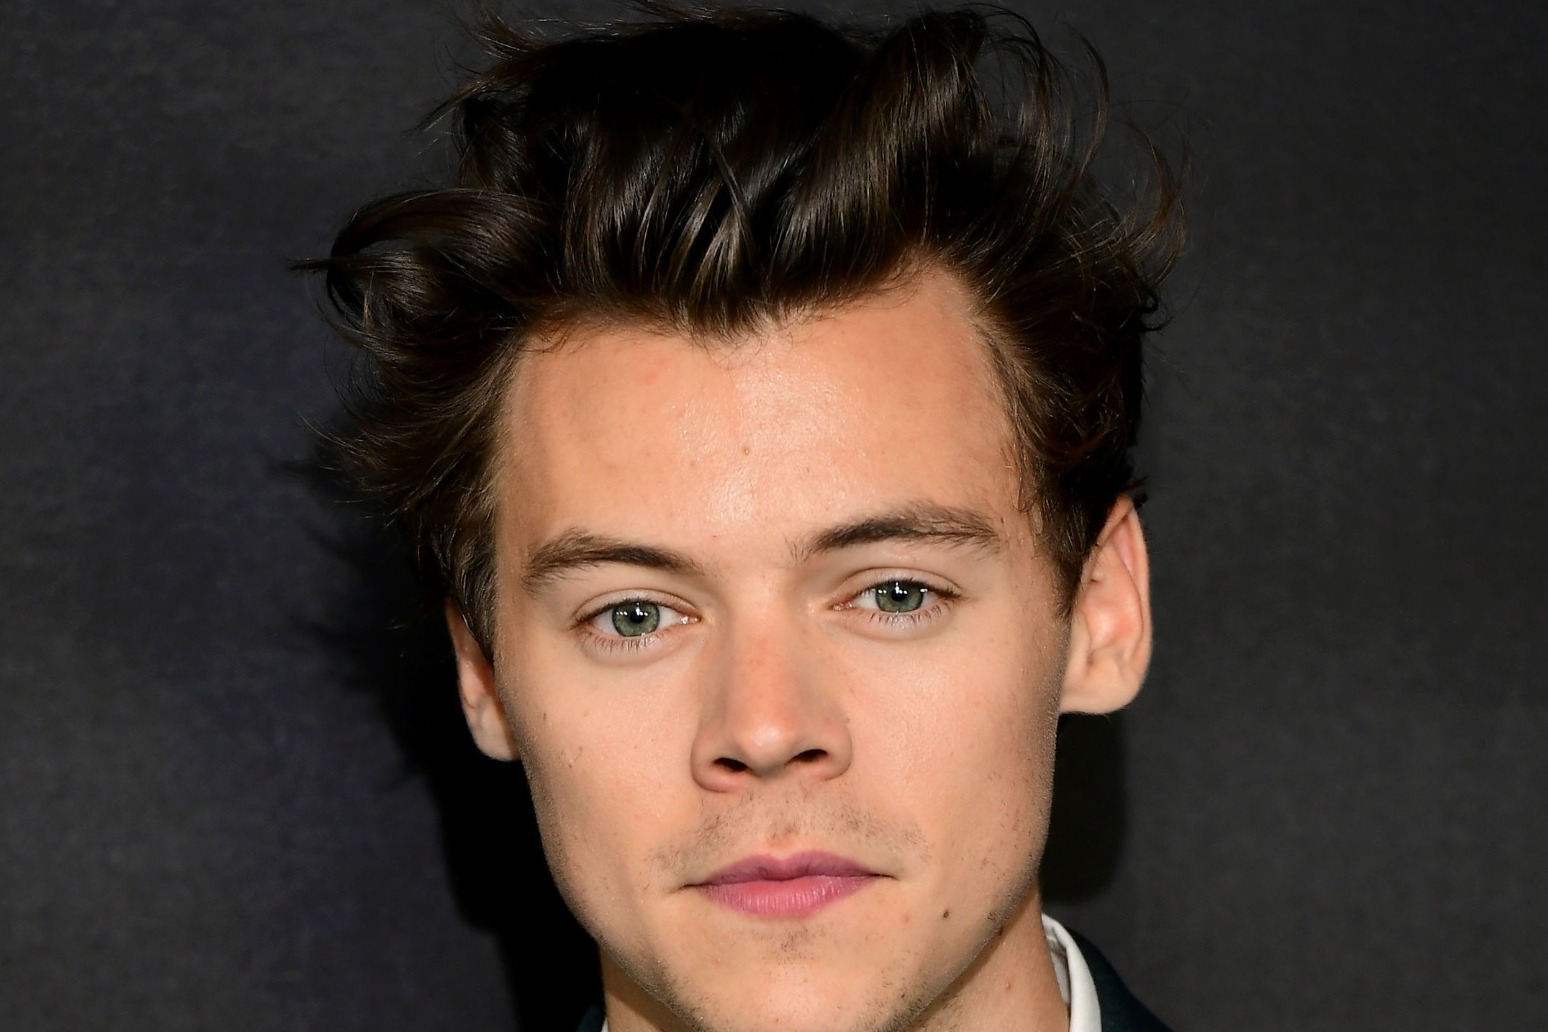 HARRY STYLES RELEASES NEW SONG AND MUSIC VIDEO 